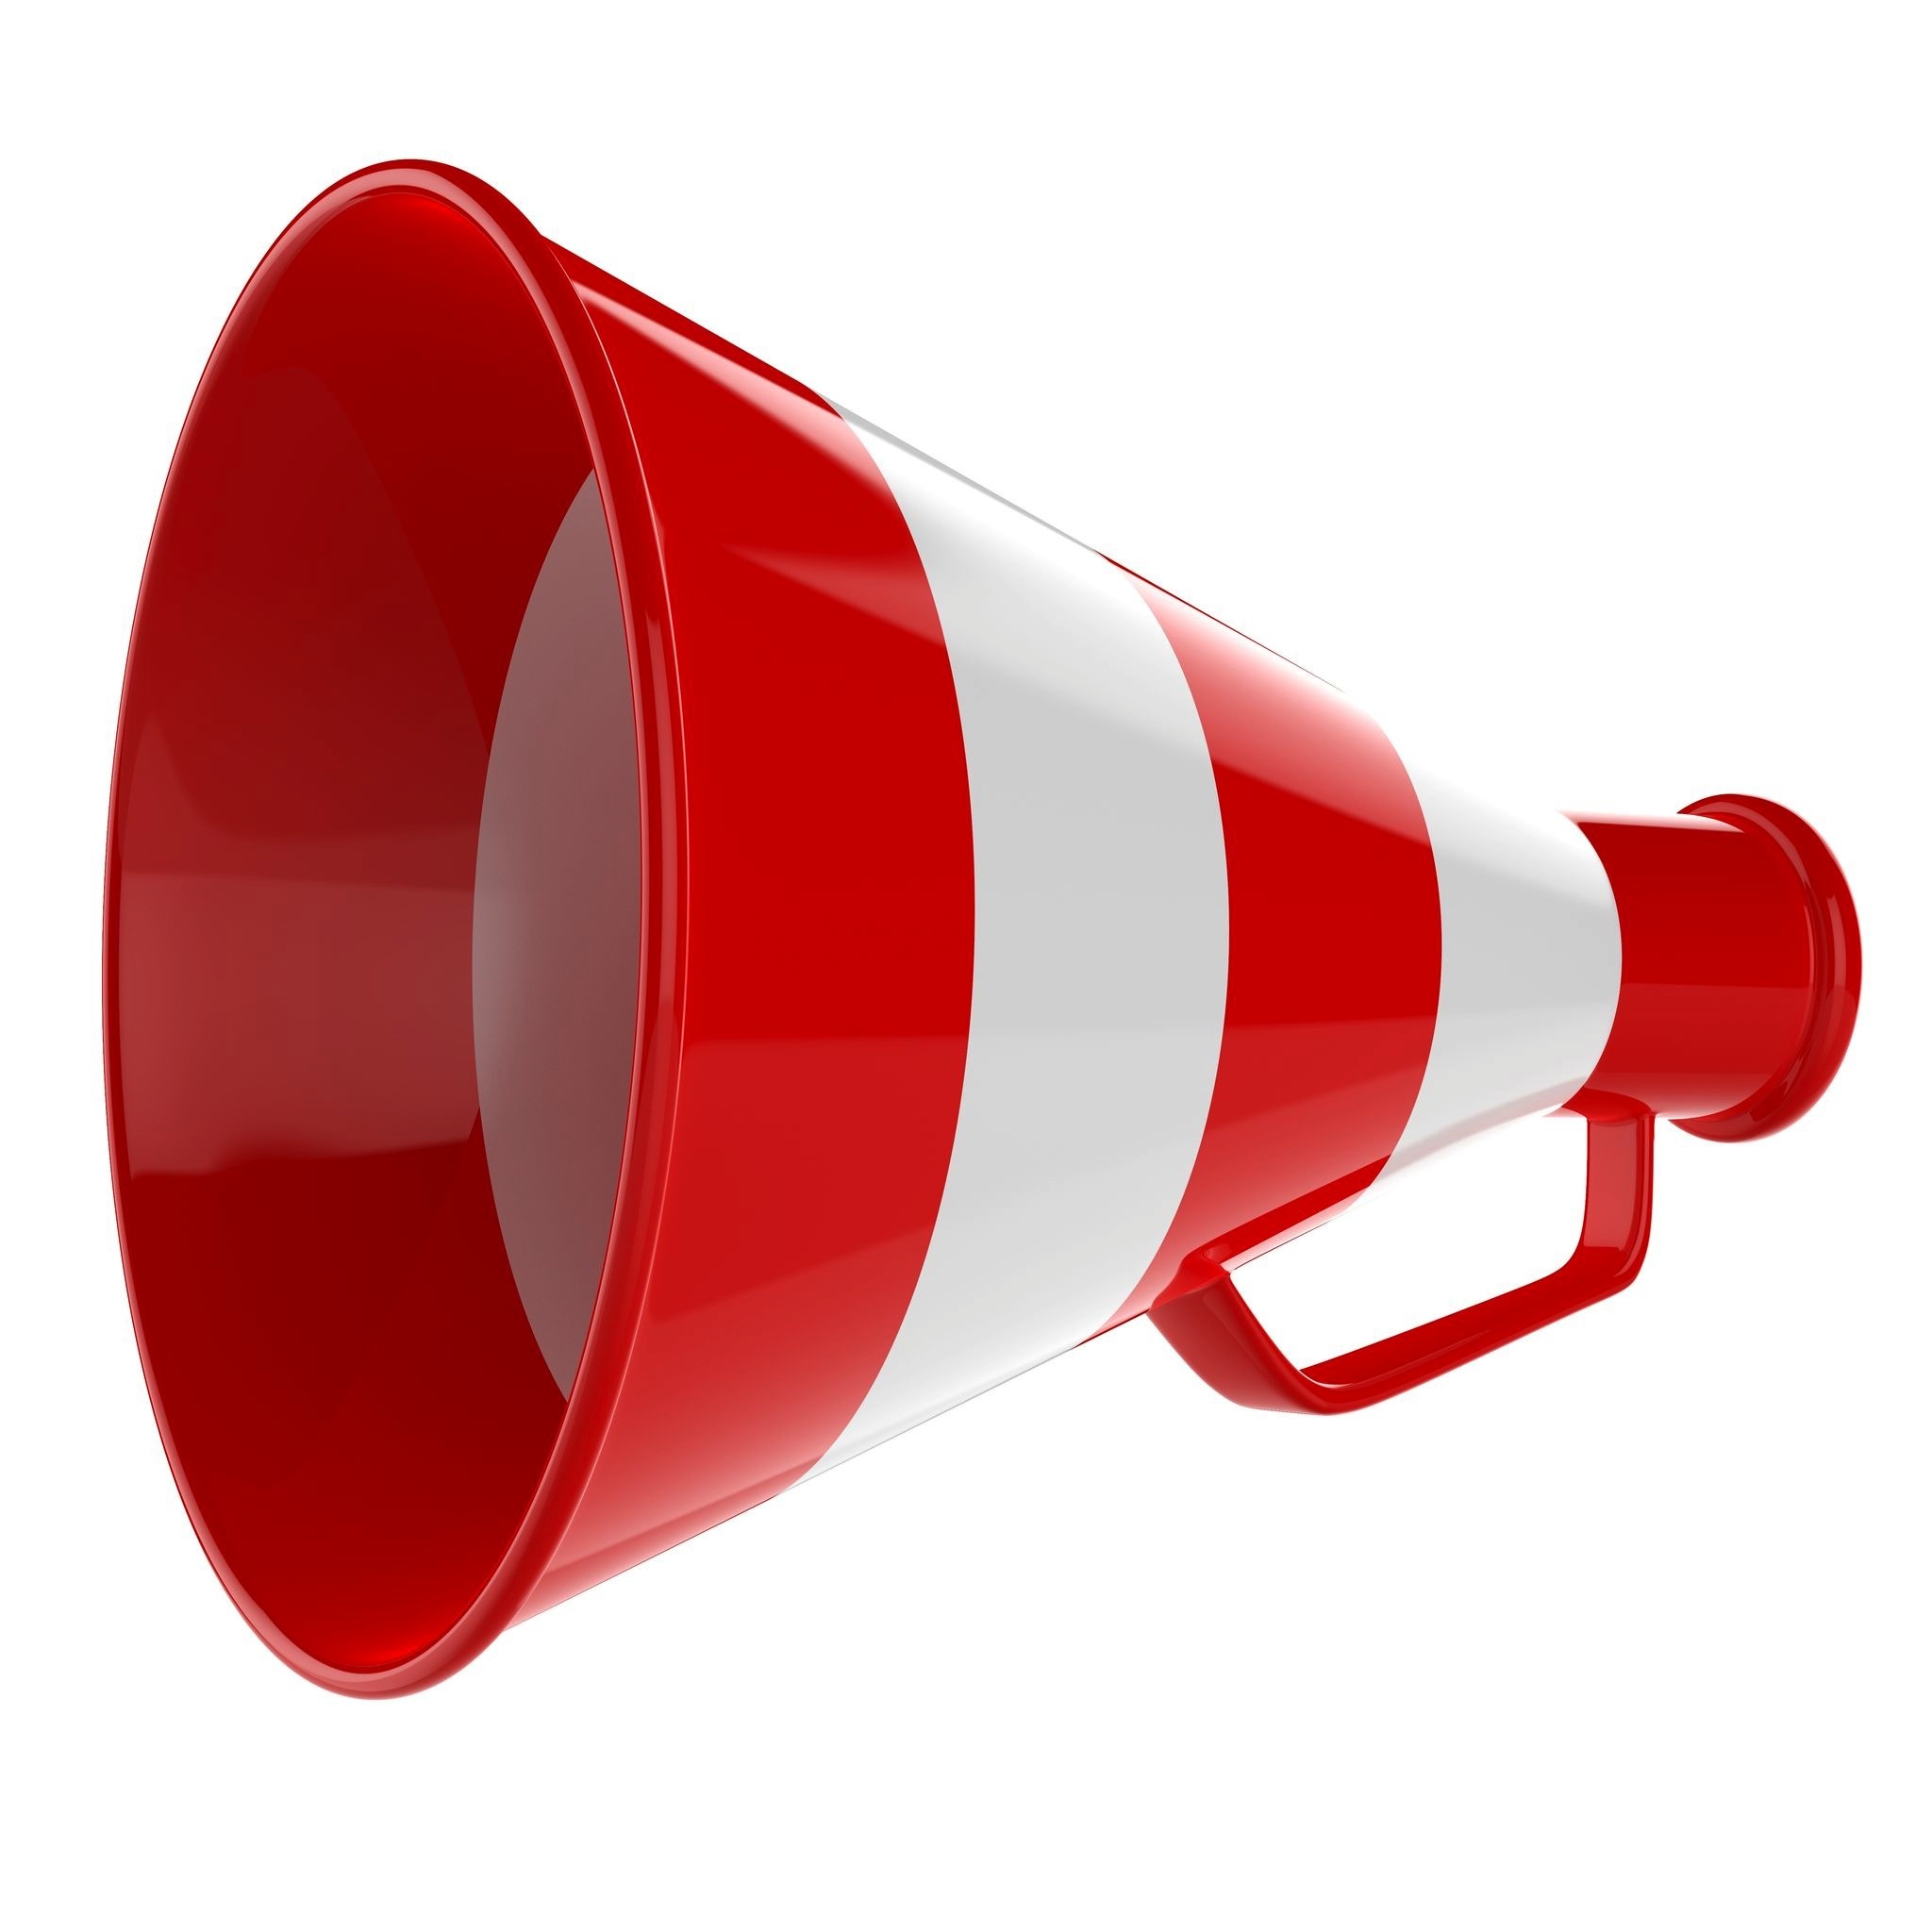 Use the “megaphone trick” to improve the way that you sound